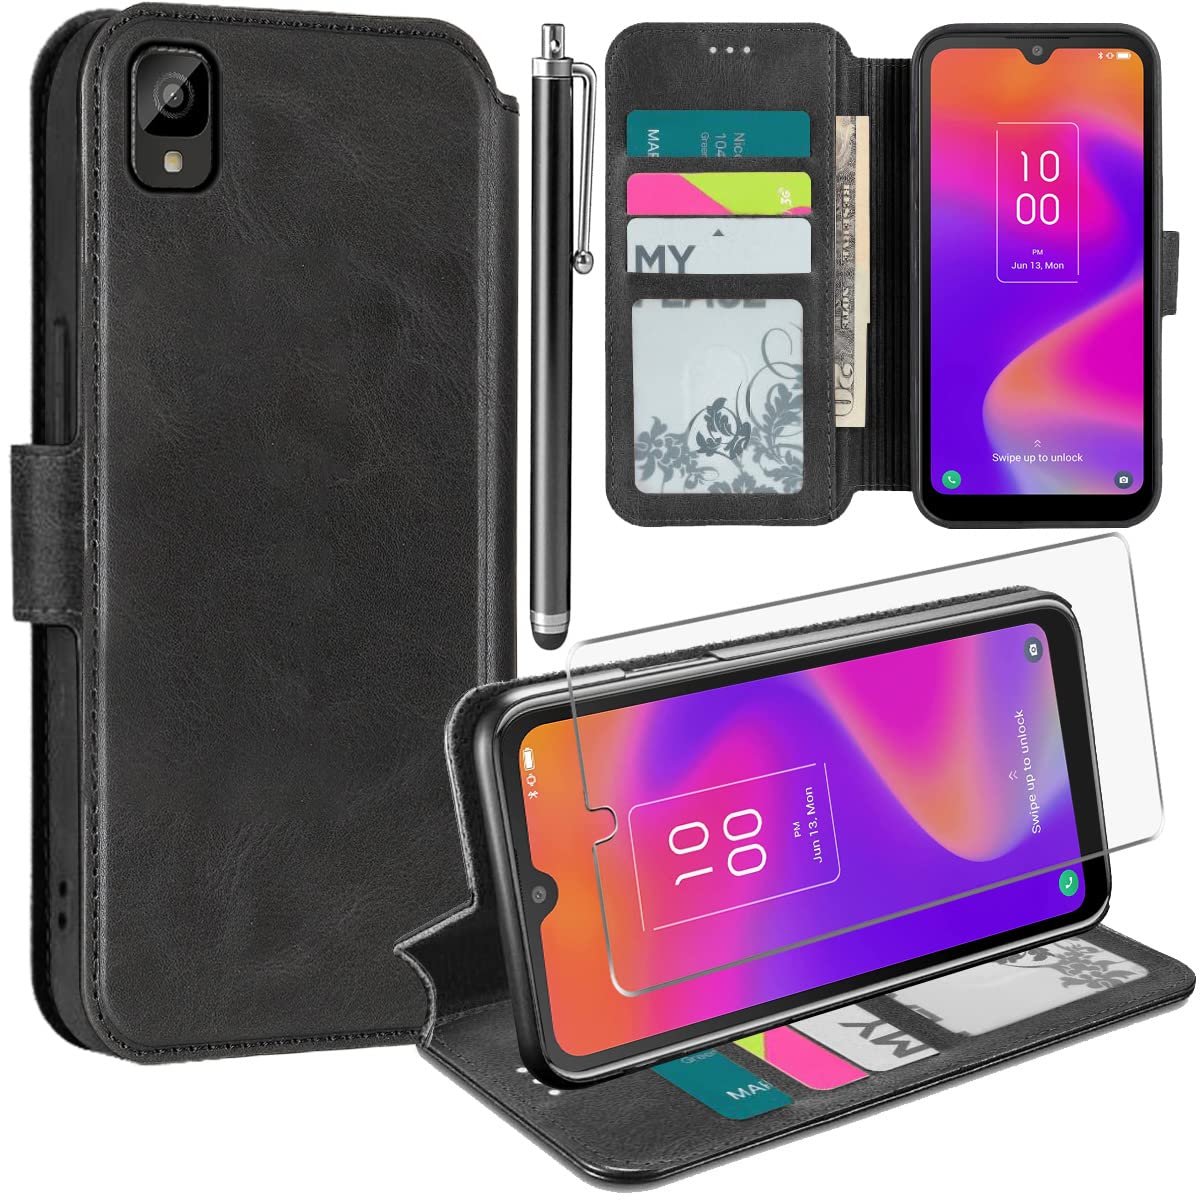 RTYJZ for TCL 30Z Case, for TCL 30Z Wallet Case with Tempered Glass Screen Protector with Card Holder Kickstand Magnetic,PU Leather Flip Case for Alcatel TCL 30Z 30LE 30 Z 4G LTE T602DL (Black)